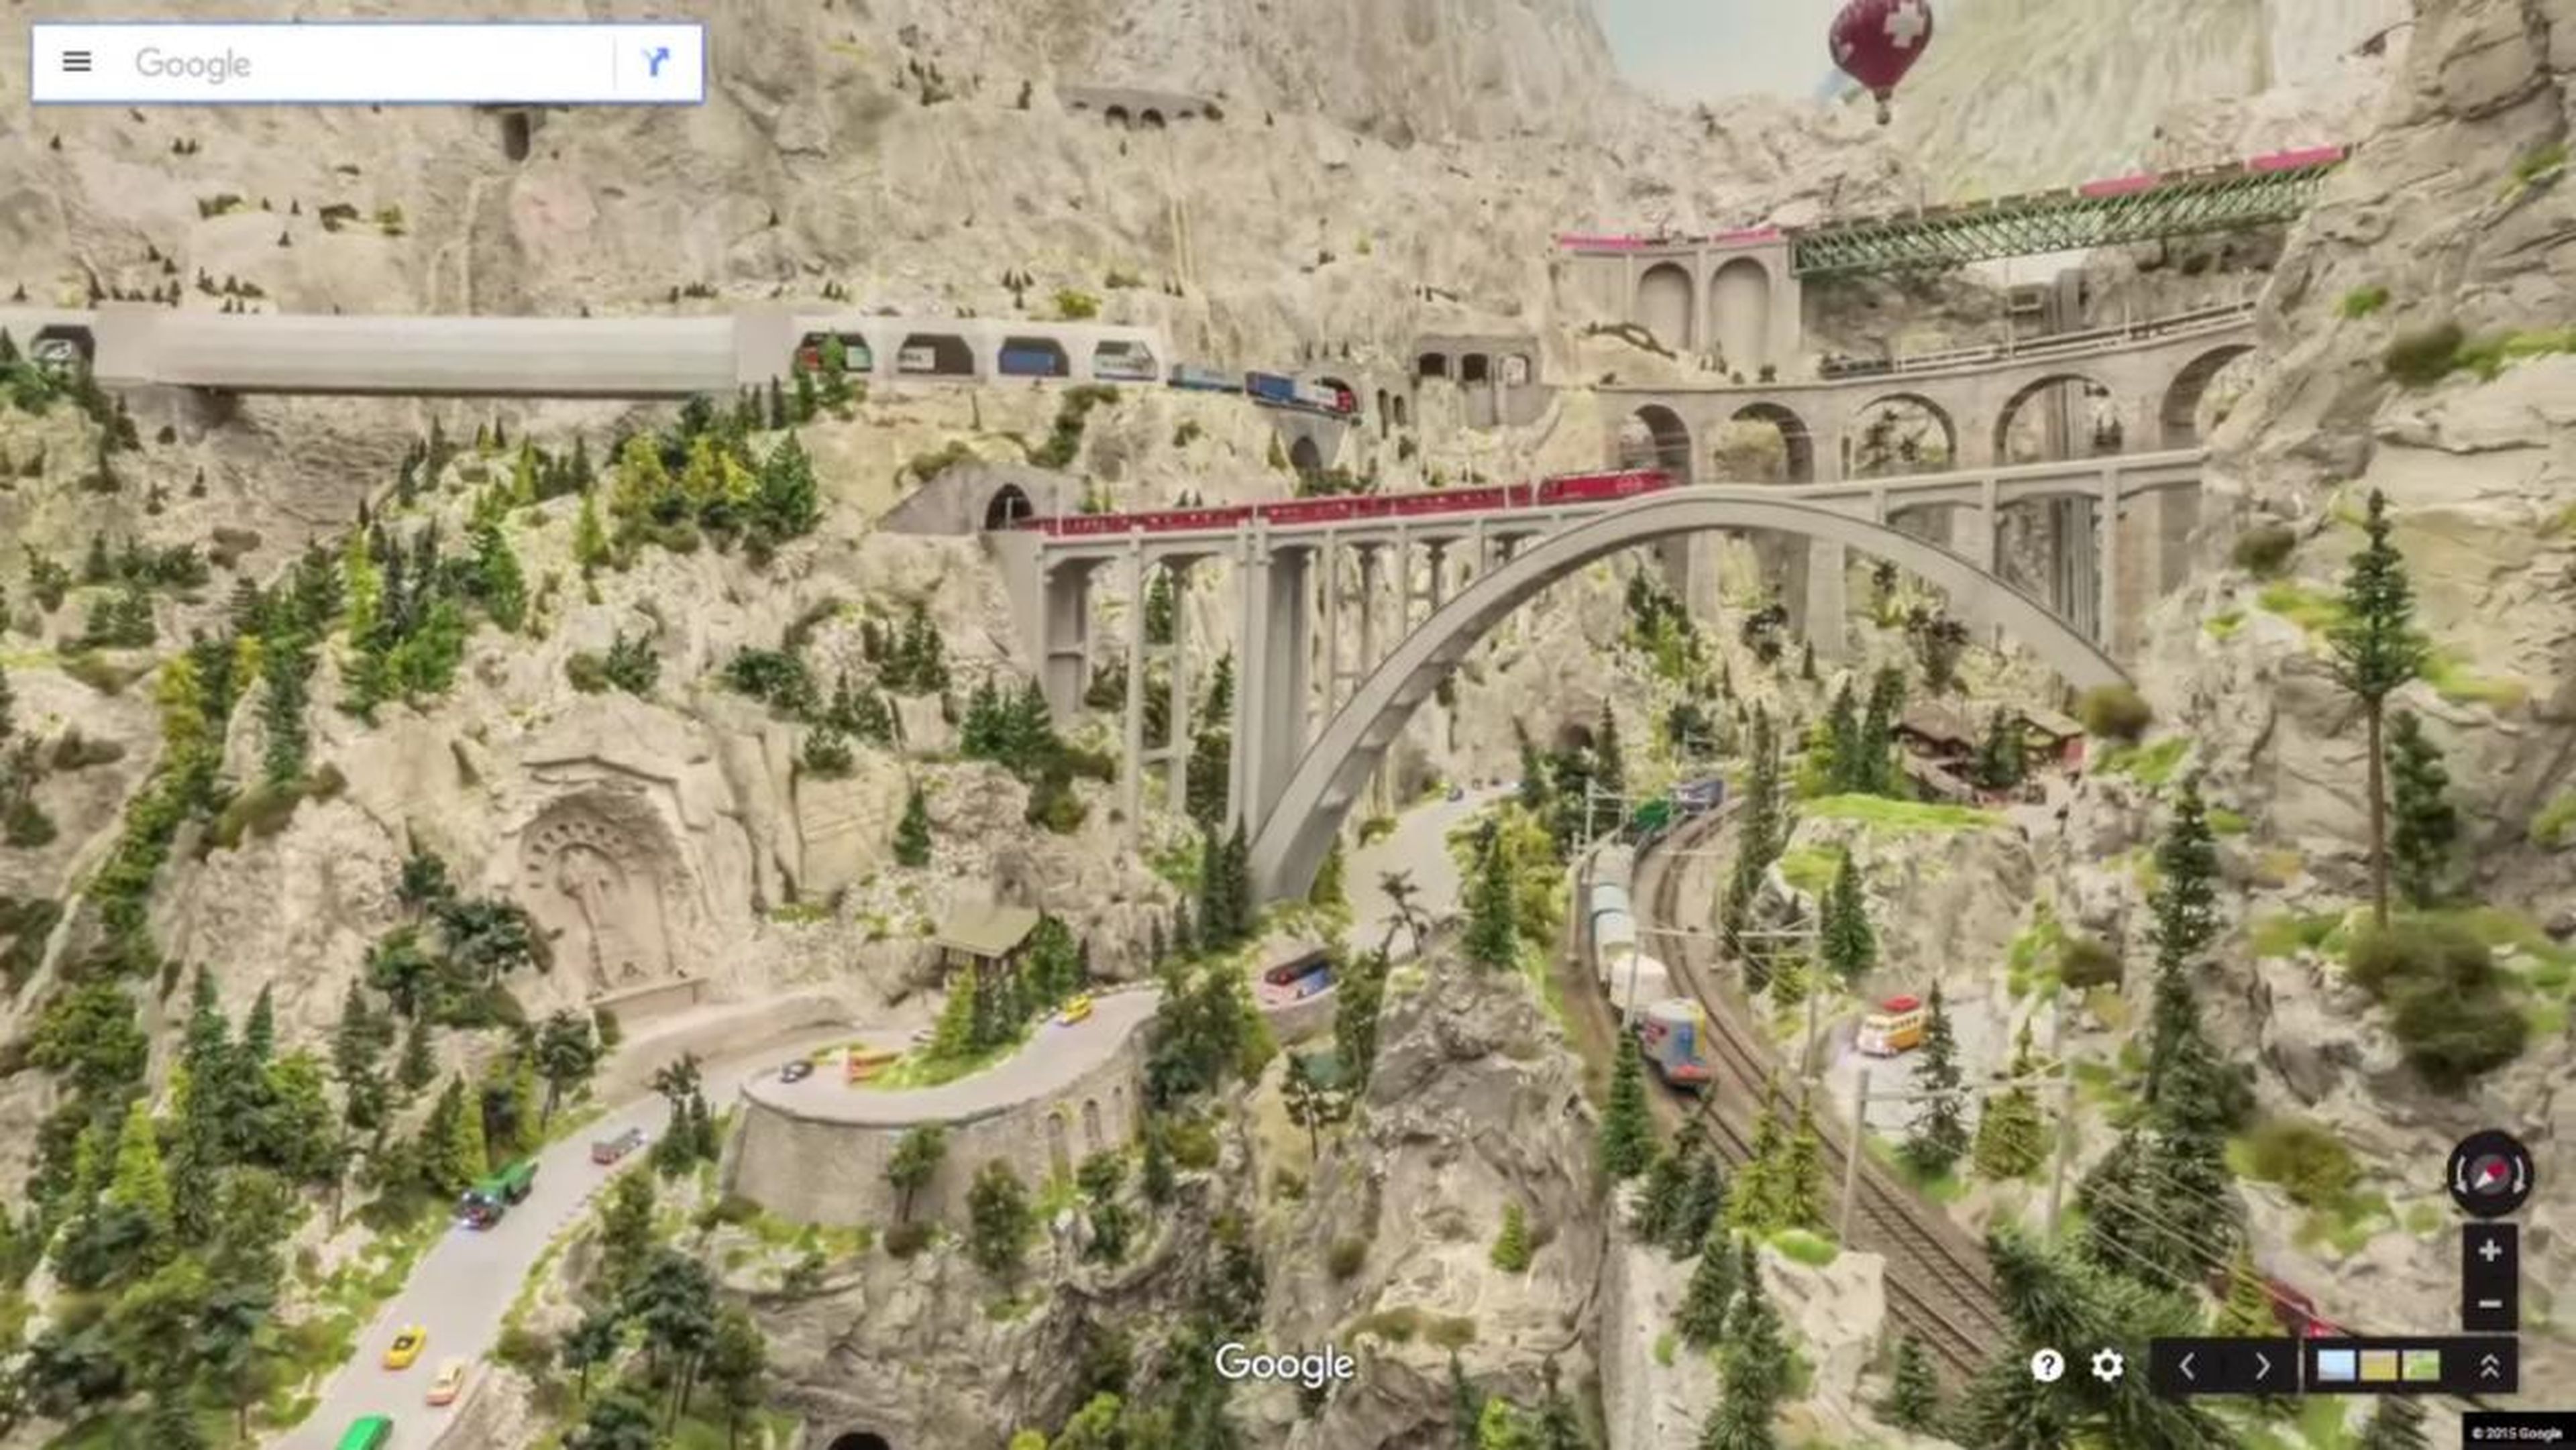 The model railway in MIniatur Wunderland is the largest in the world. It connects all the areas of the Wunderland, which represent some iconic places around the world.